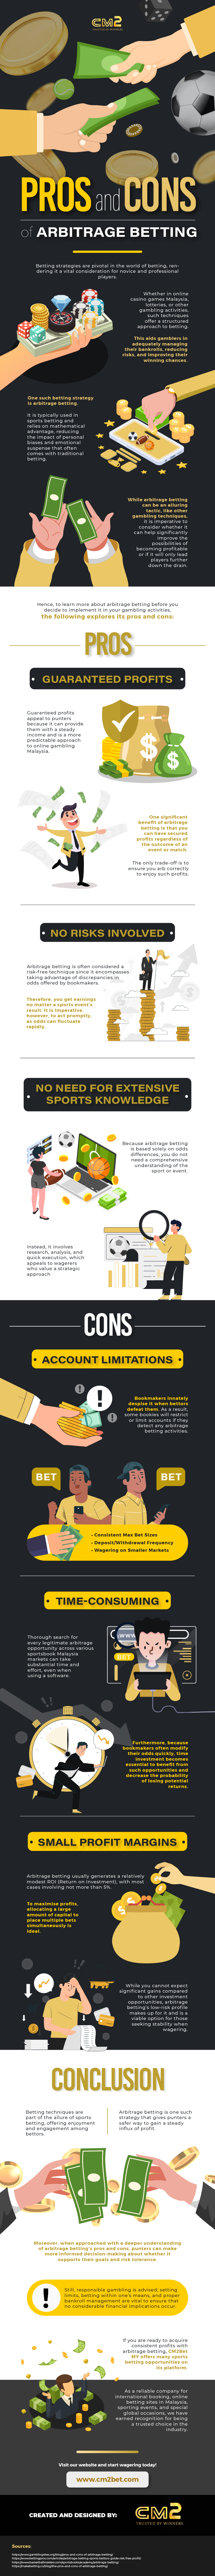 Pros and Cons of Arbitrage Betting